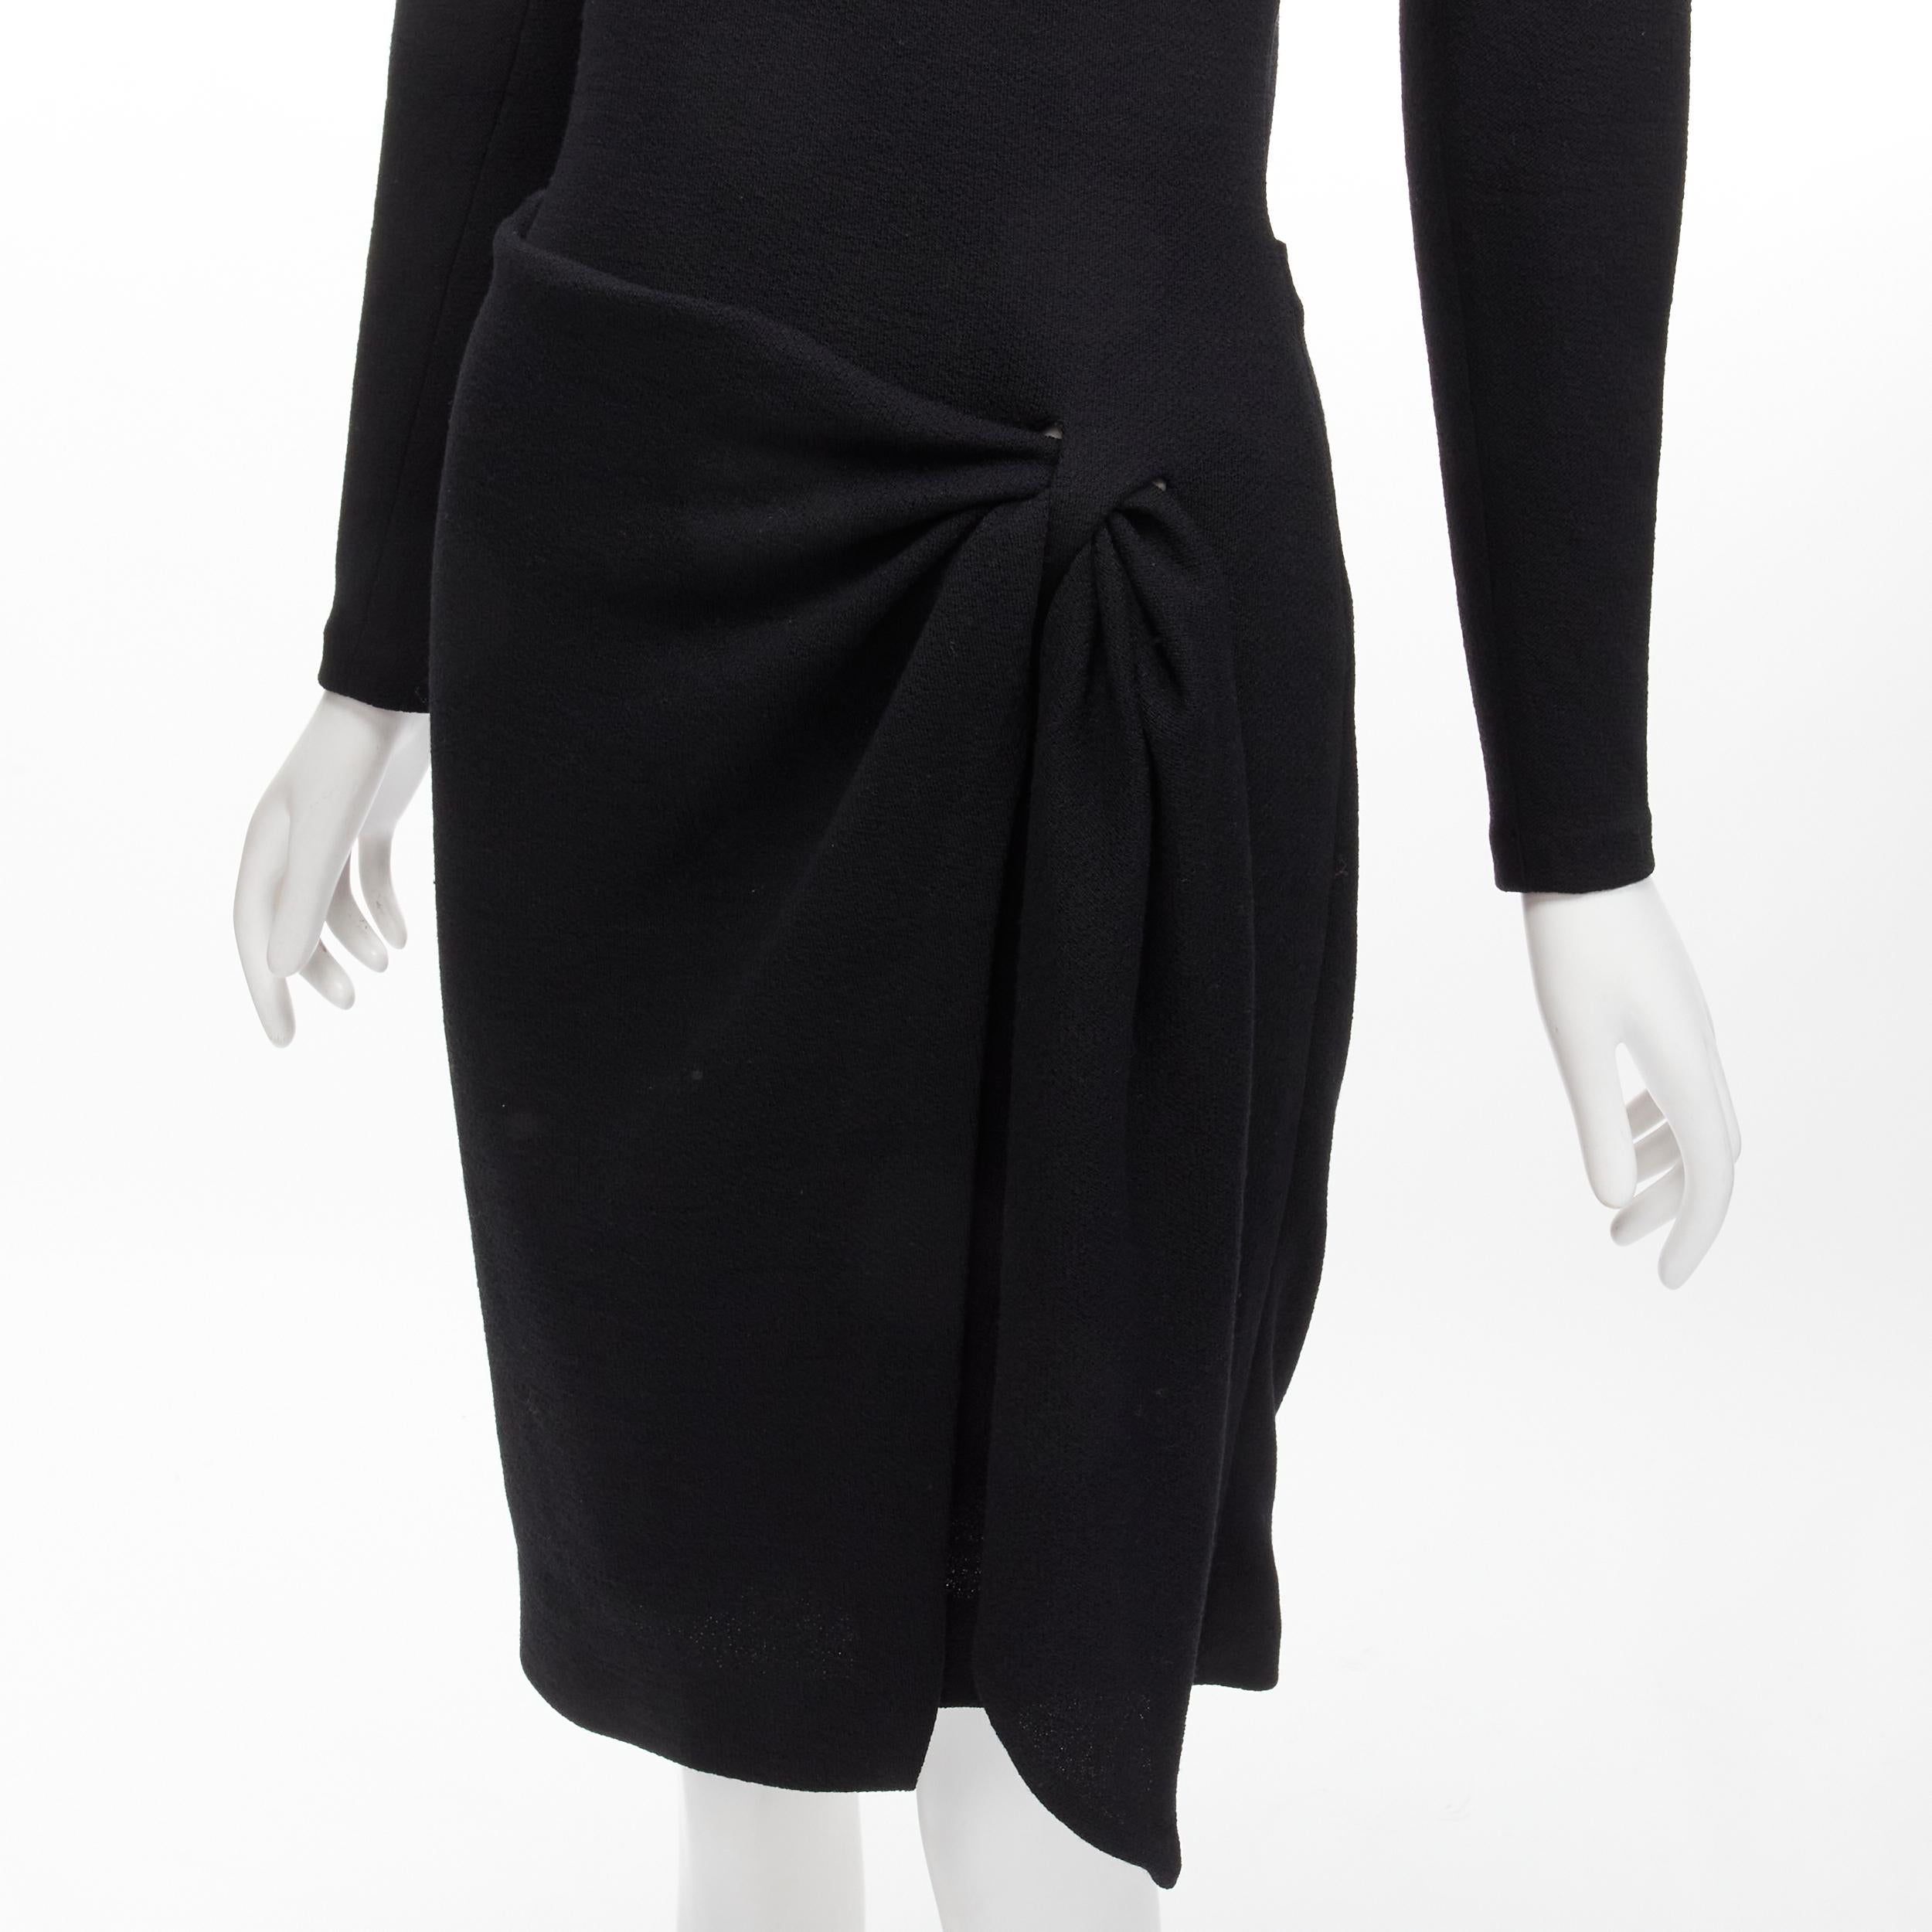 DONNA KARAN Vintage 100% wool drape wrap crew neck knee dress US4 S
Reference: TGAS/C01615
Brand: Donna Karan
Material: Wool
Color: Black
Pattern: Solid
Closure: Zip
Made in: United States

CONDITION:
Condition: Excellent, this item was pre-owned